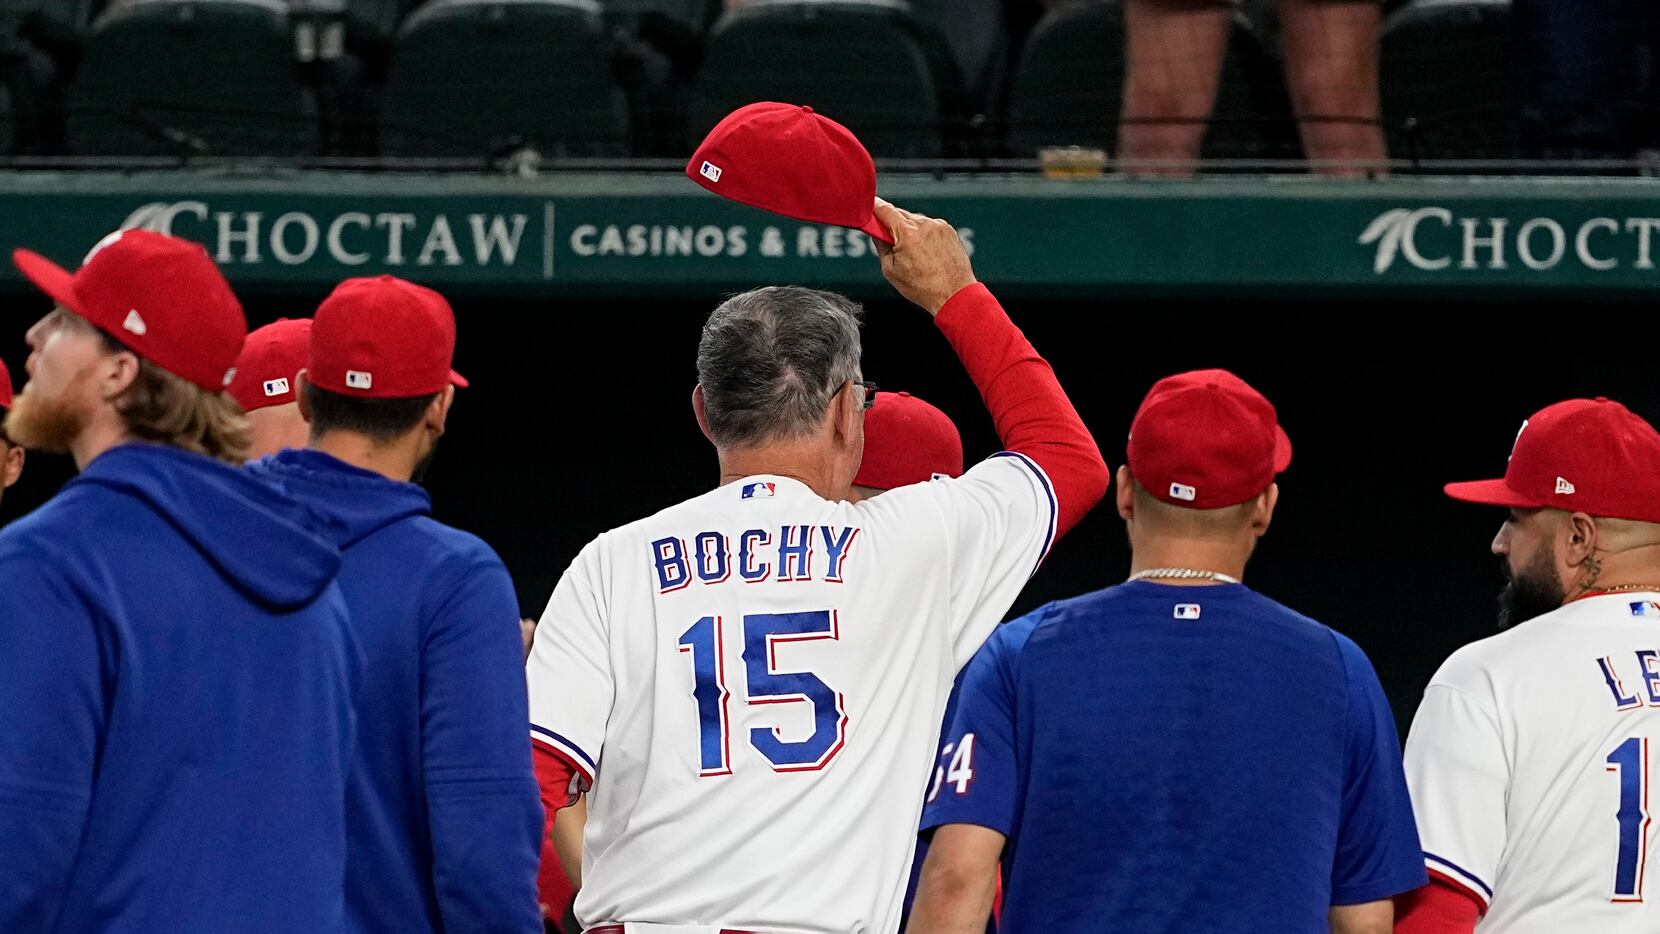 Bruce Bochy and Dusty Baker show respect